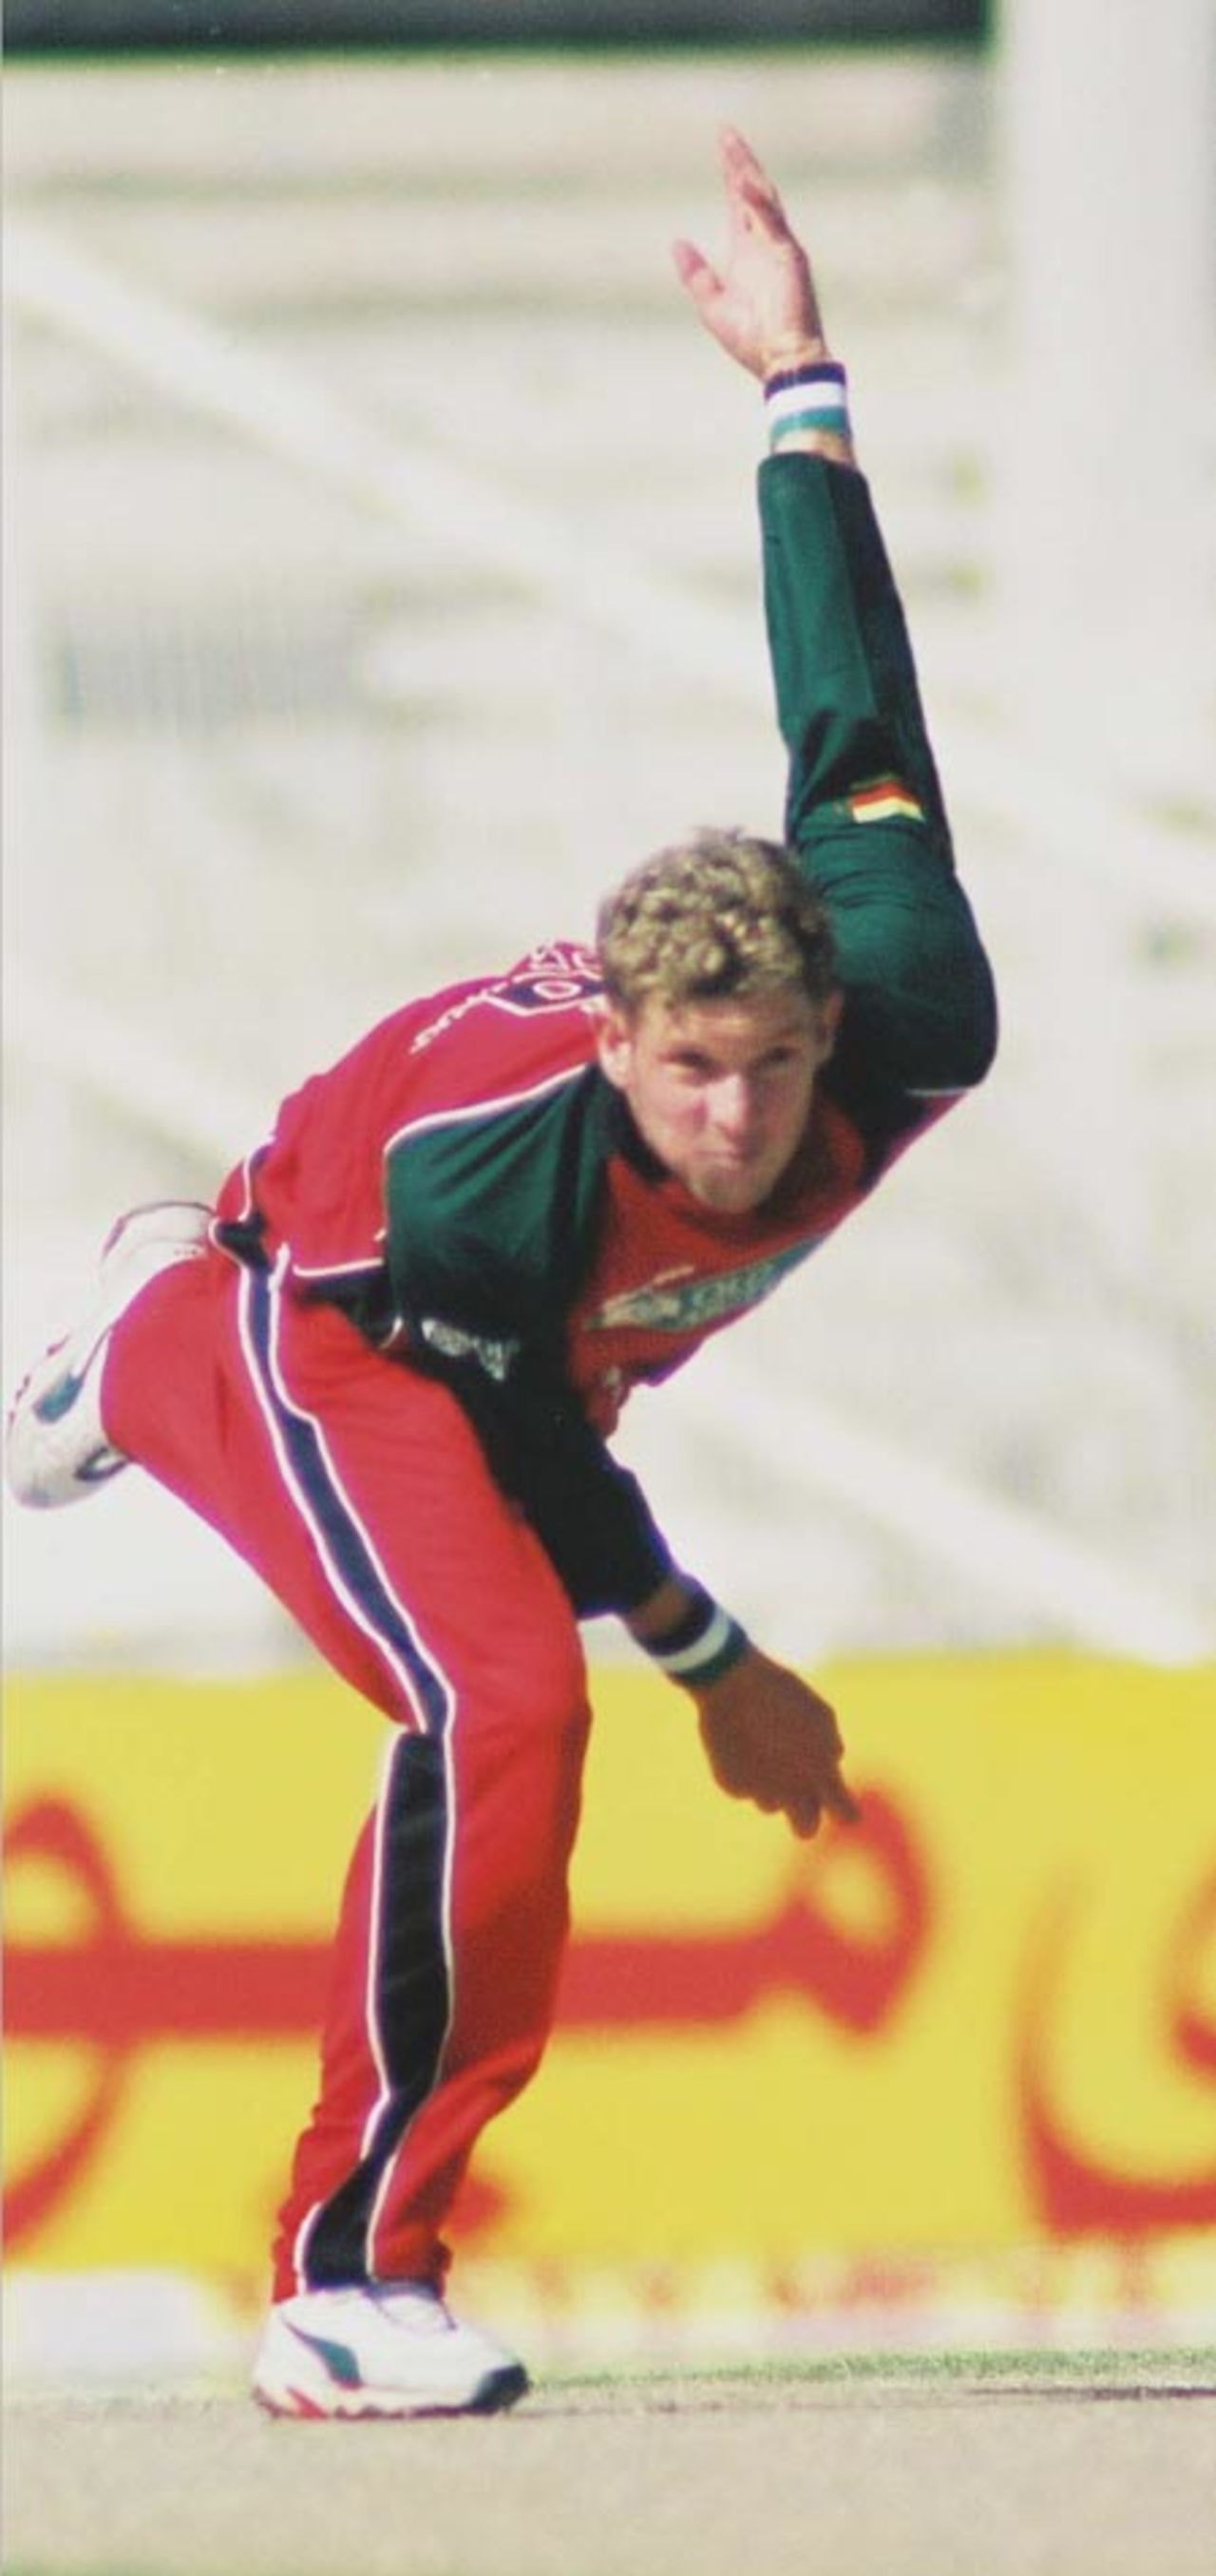 Andy Blignaut in his bowling stride, 1st Match: Pakistan v Zimbabwe, Cherry Blossom Sharjah Cup, 3 April 2003